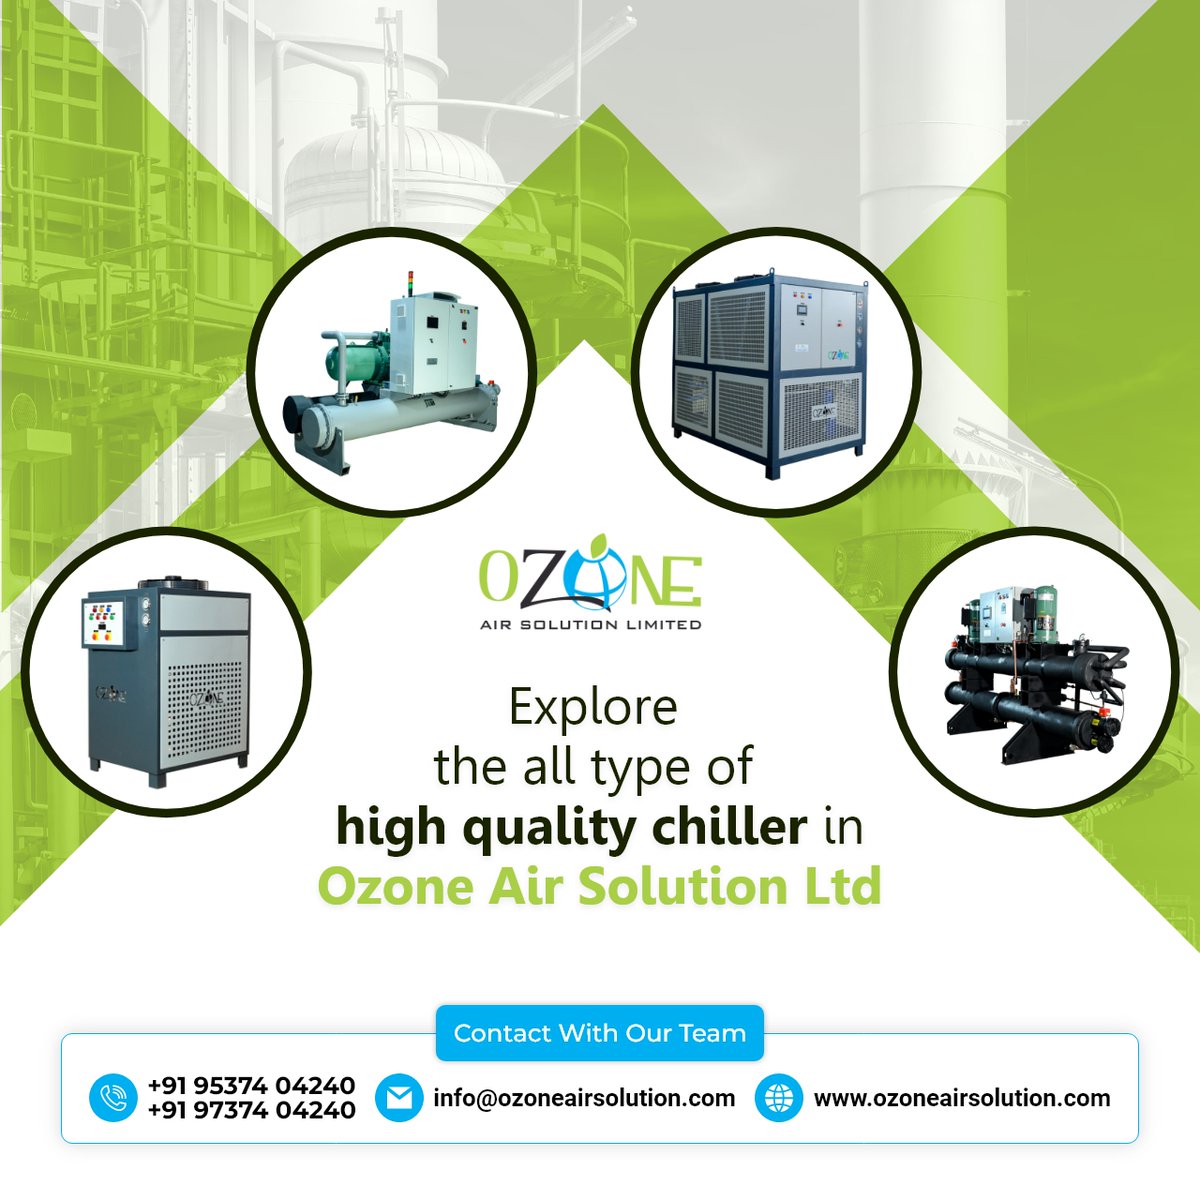 Dive into the world of efficient cooling solutions with Ozone Air Solution Ltd! 🌀❄️

#CoolingTech #IndustrialChillers #OzoneAirSolutions #ClimateControl #InnovationInCooling #QualityCooling #AirSolutions #SustainableTech #EnergyEfficiency #BusinessGrowth #Ozone #OzoneChiller